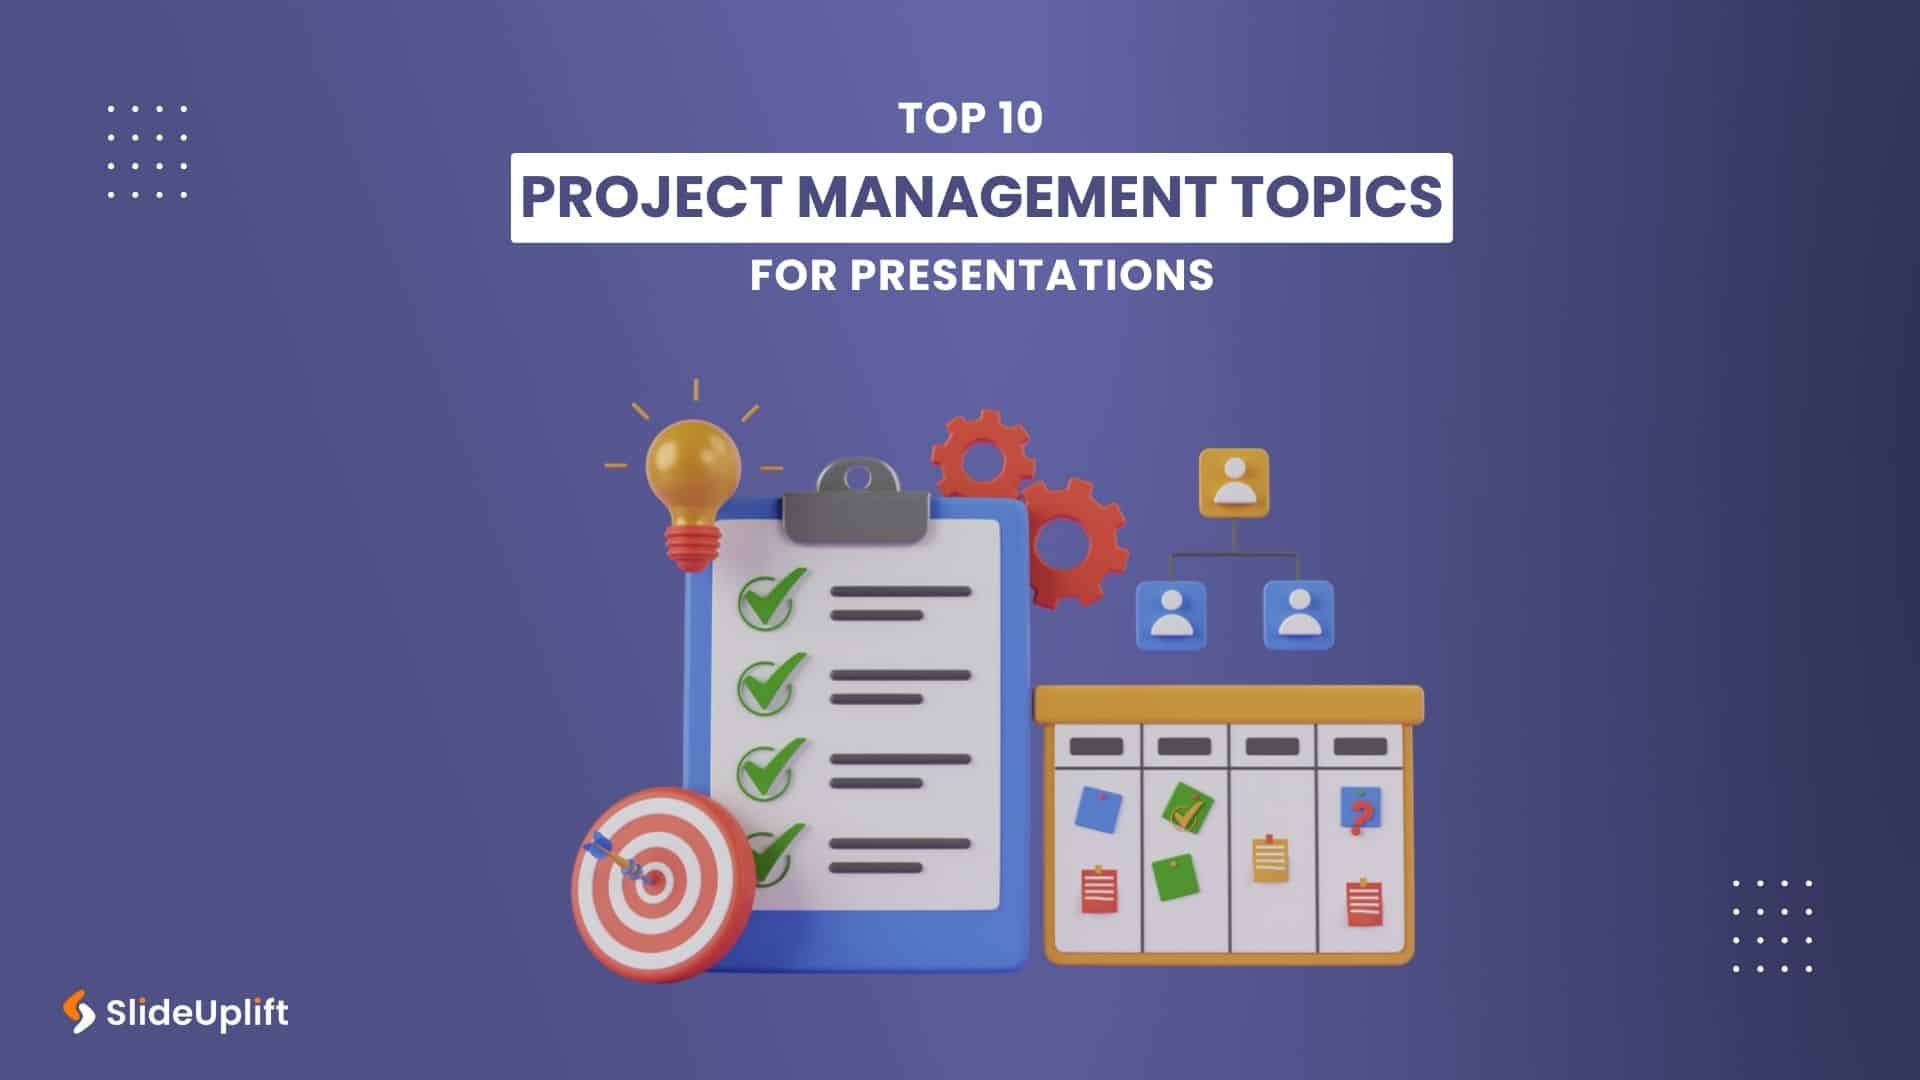 how to make a presentation about a project